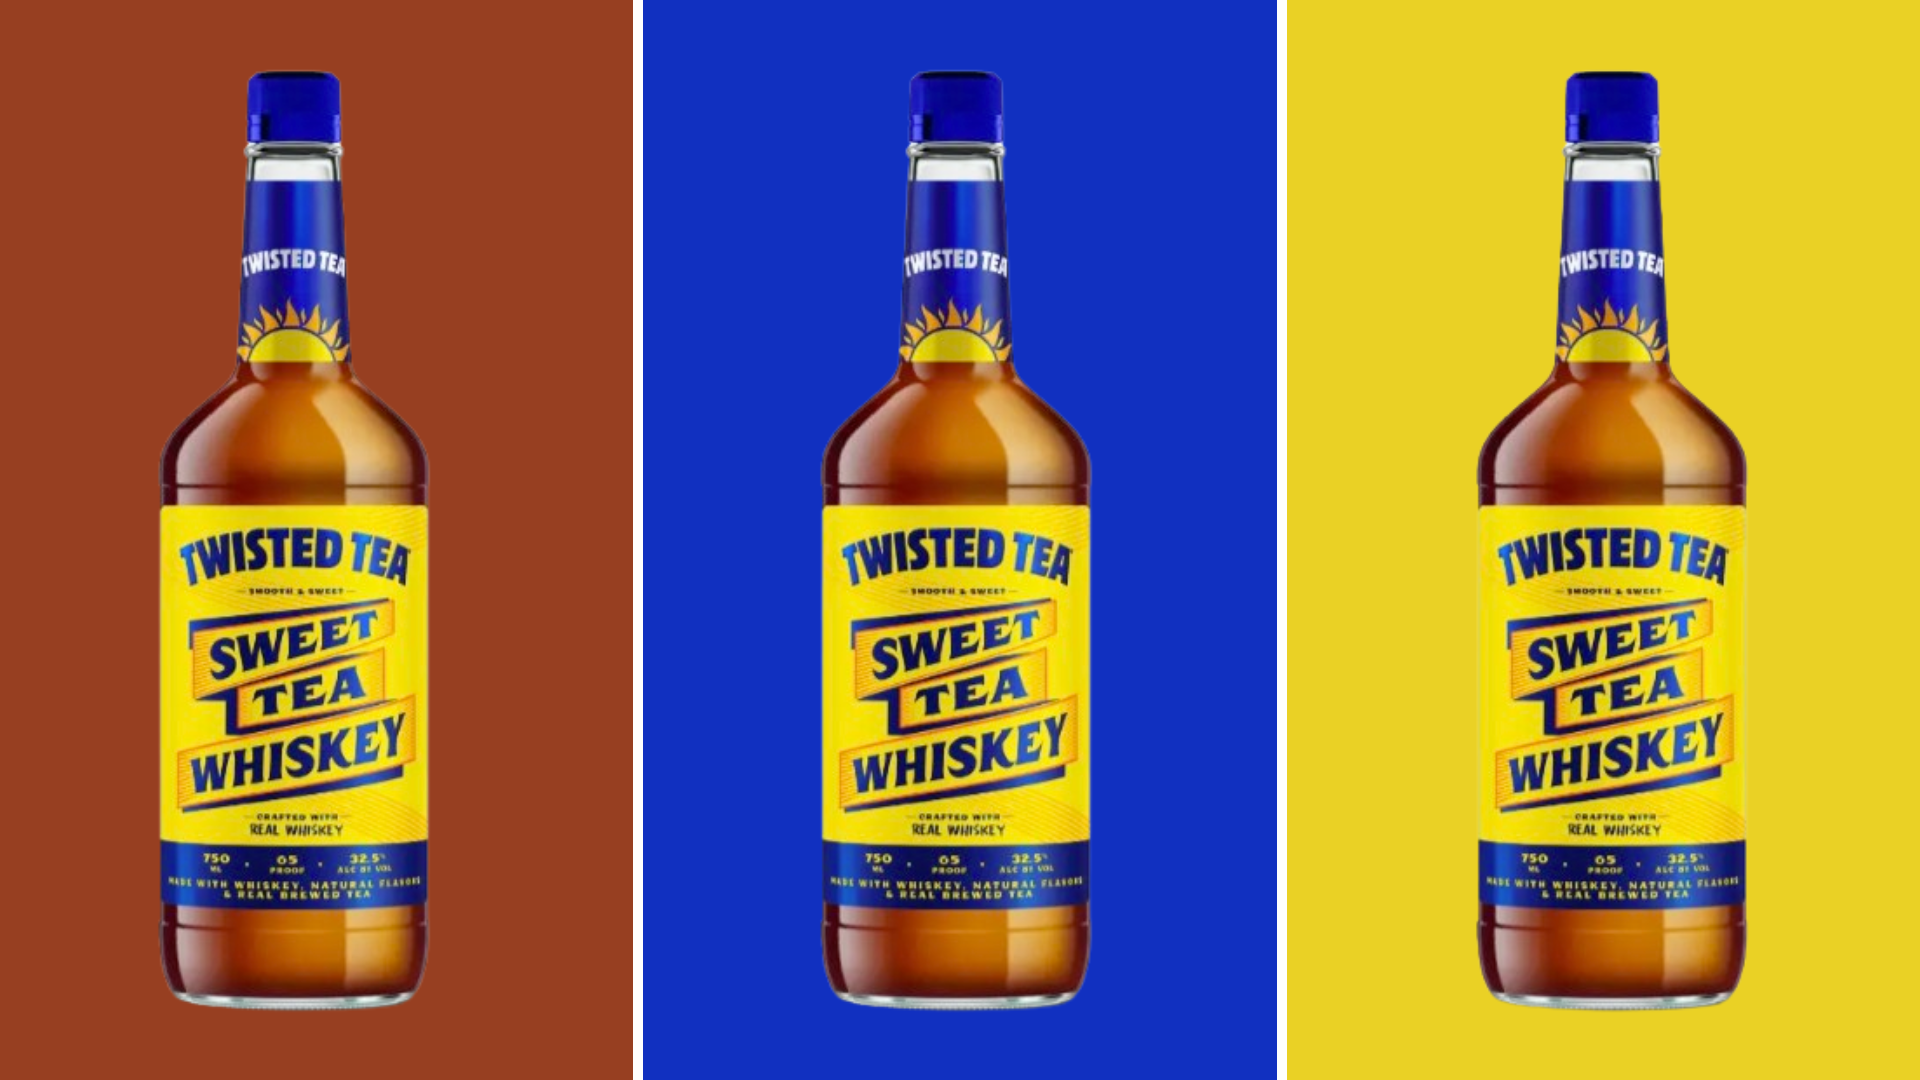 Twisted Tea bottles on brown, yellow and blue background